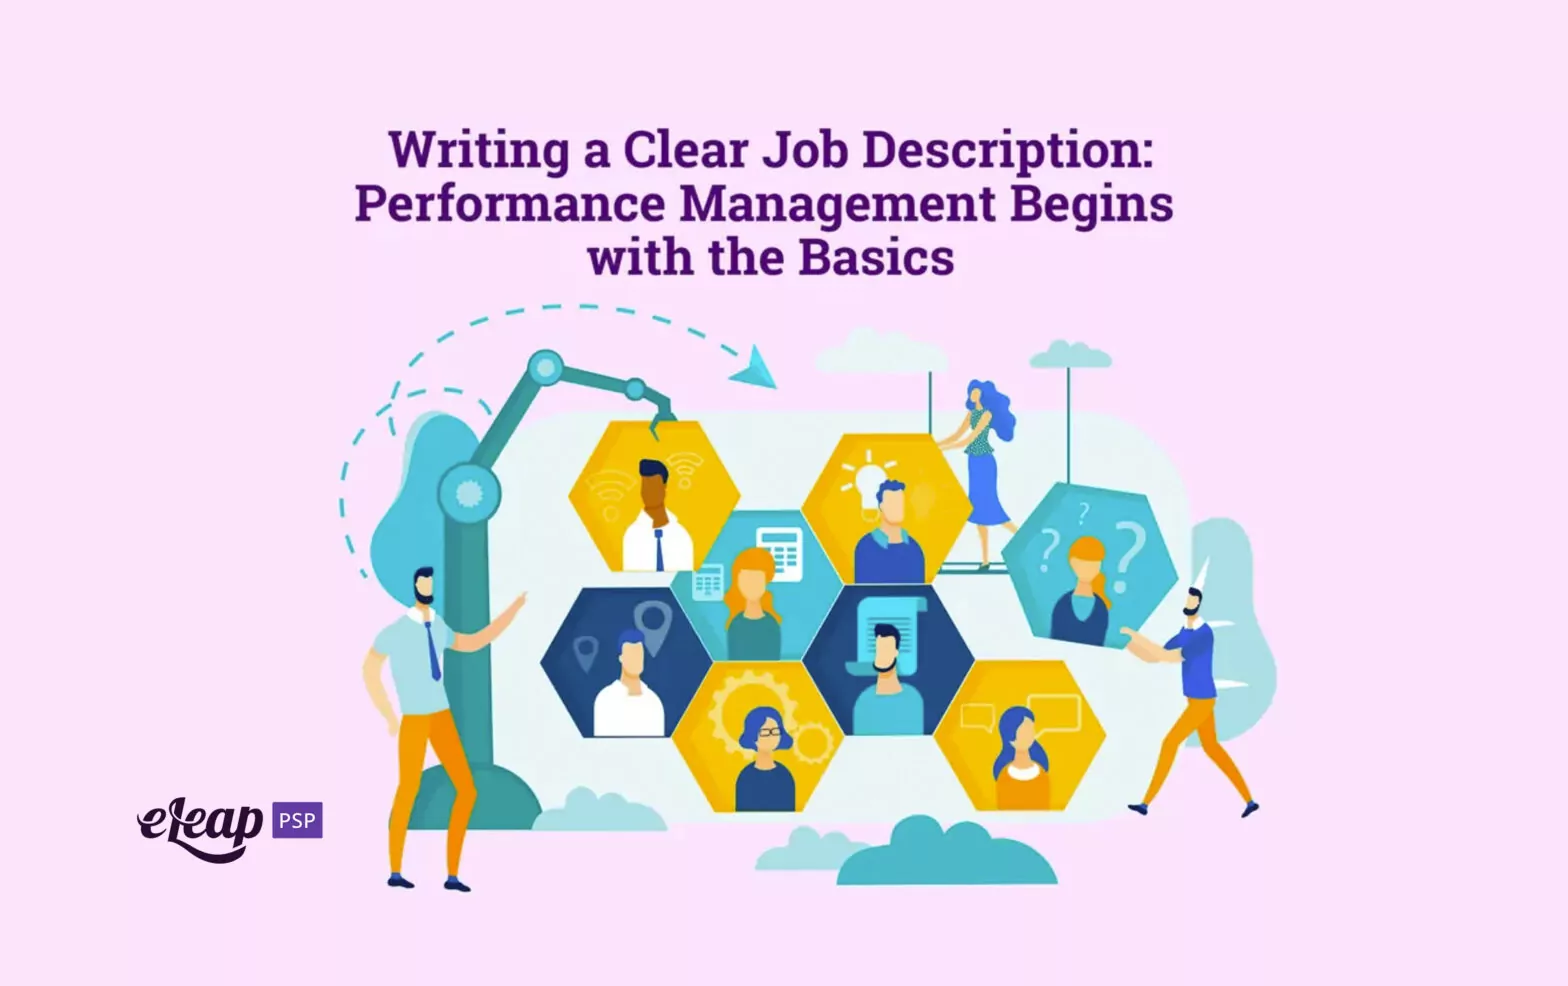 Writing a Clear Job Description: Performance Management Begins with the Basics